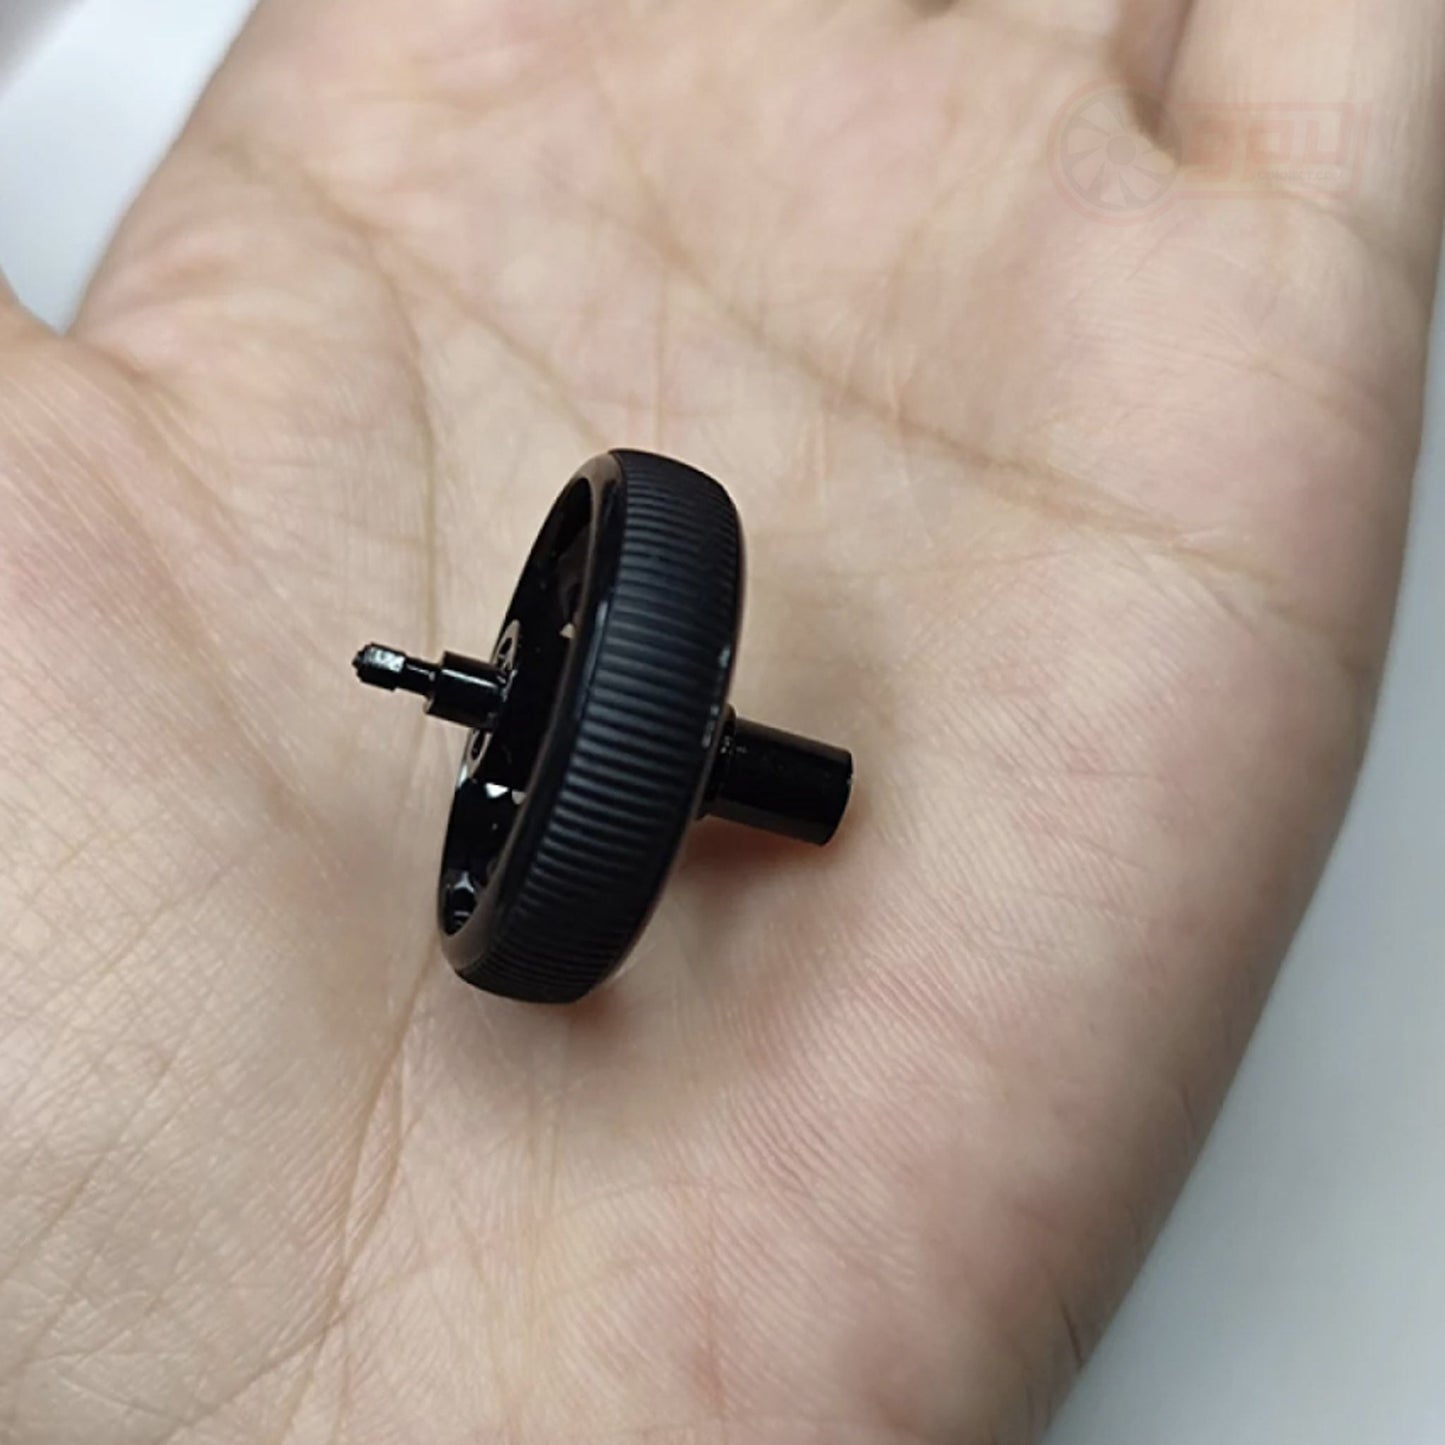 GPro Wireless Scroll Wheel Replacement Part for Logitech Mouse GPW G Pro - GPUCONNECT.COM